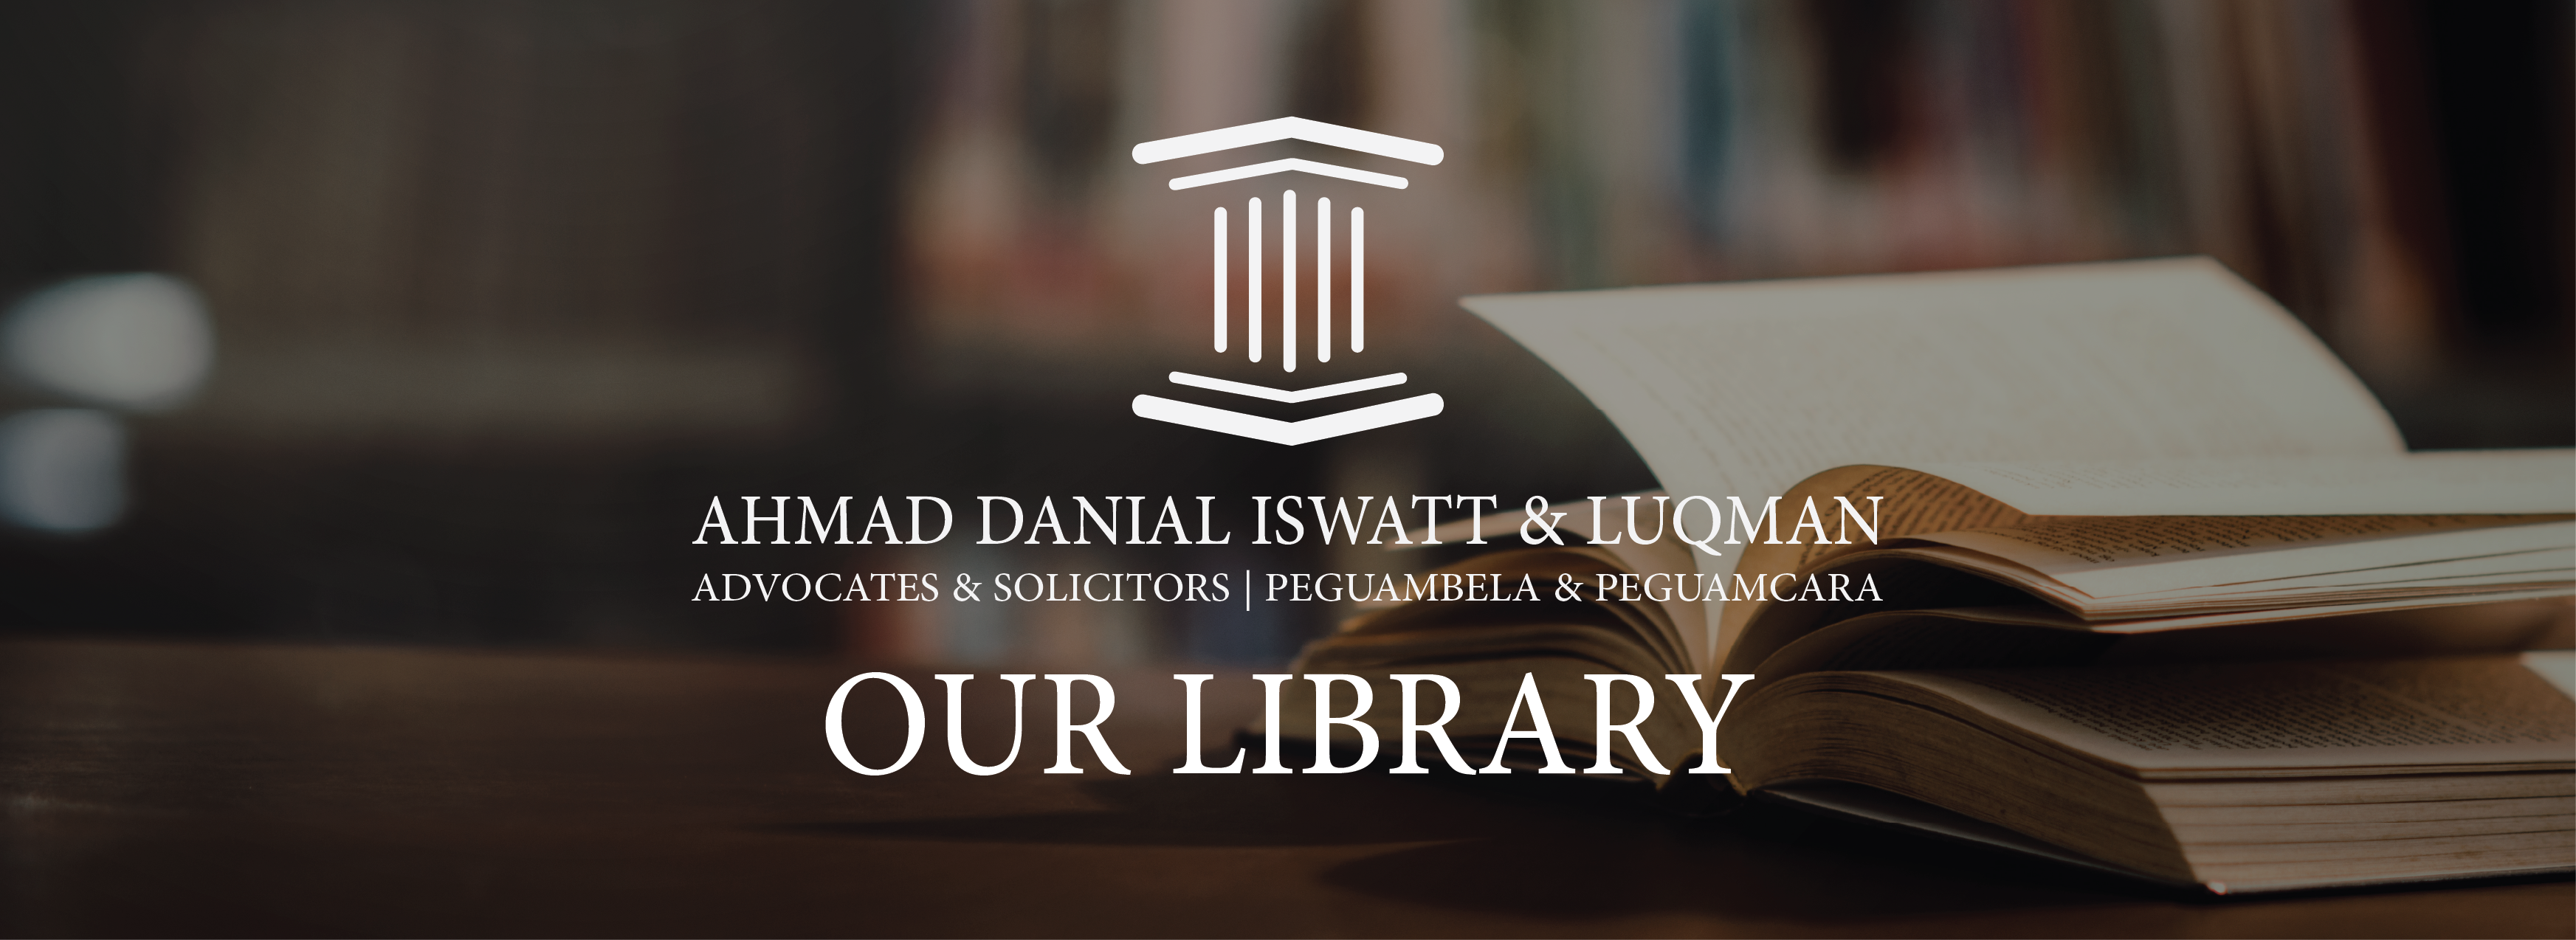 our library banner